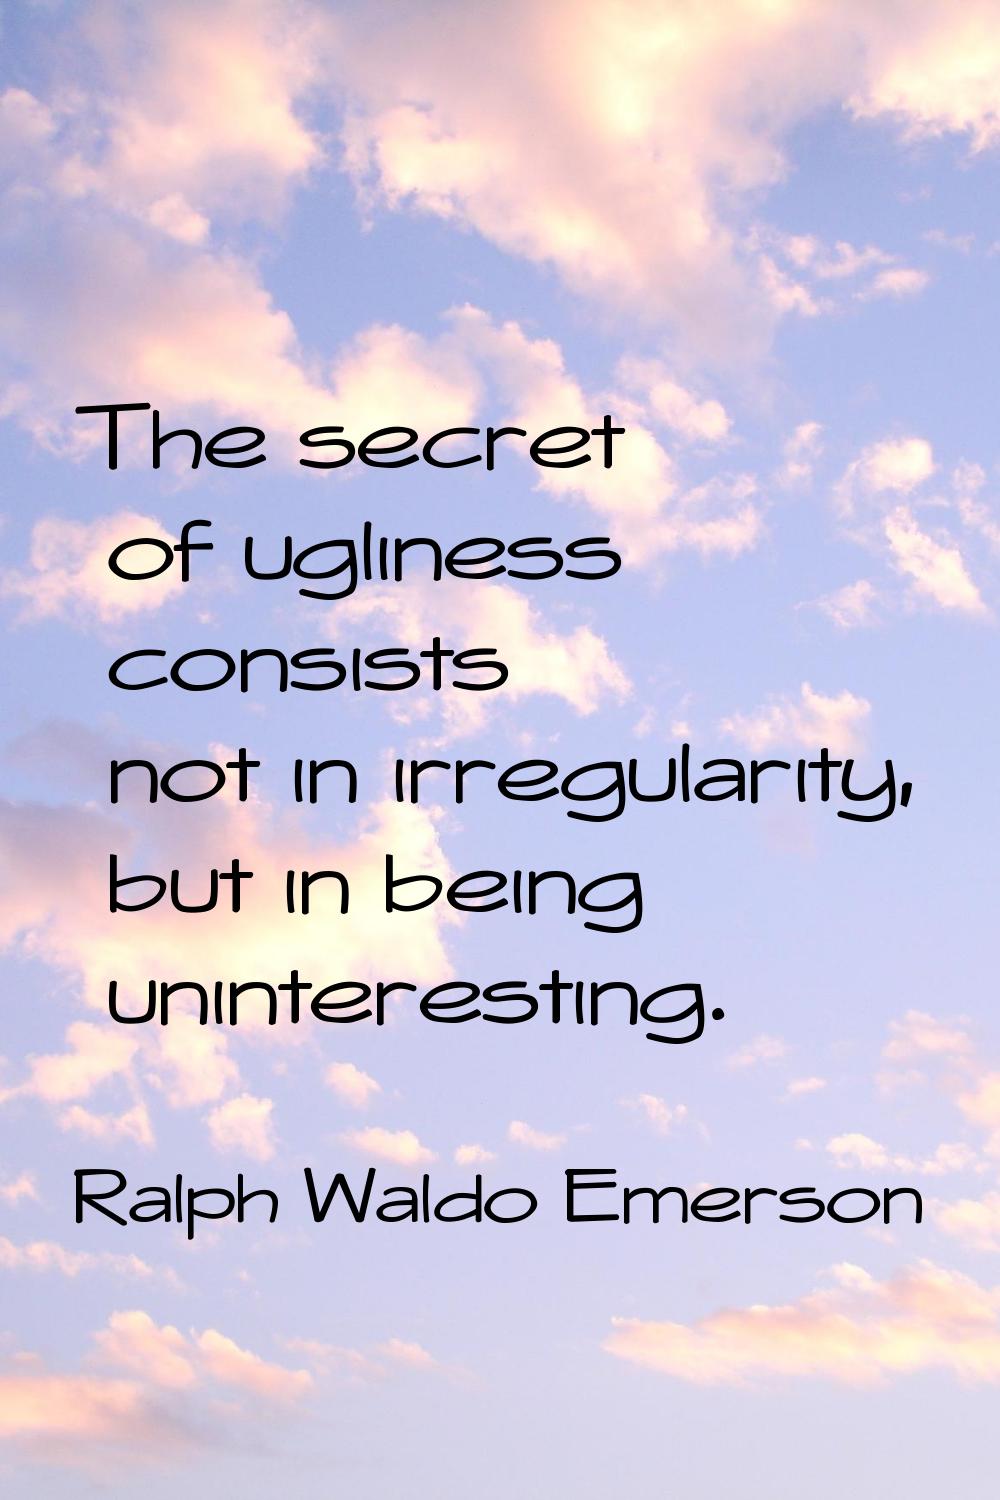 The secret of ugliness consists not in irregularity, but in being uninteresting.